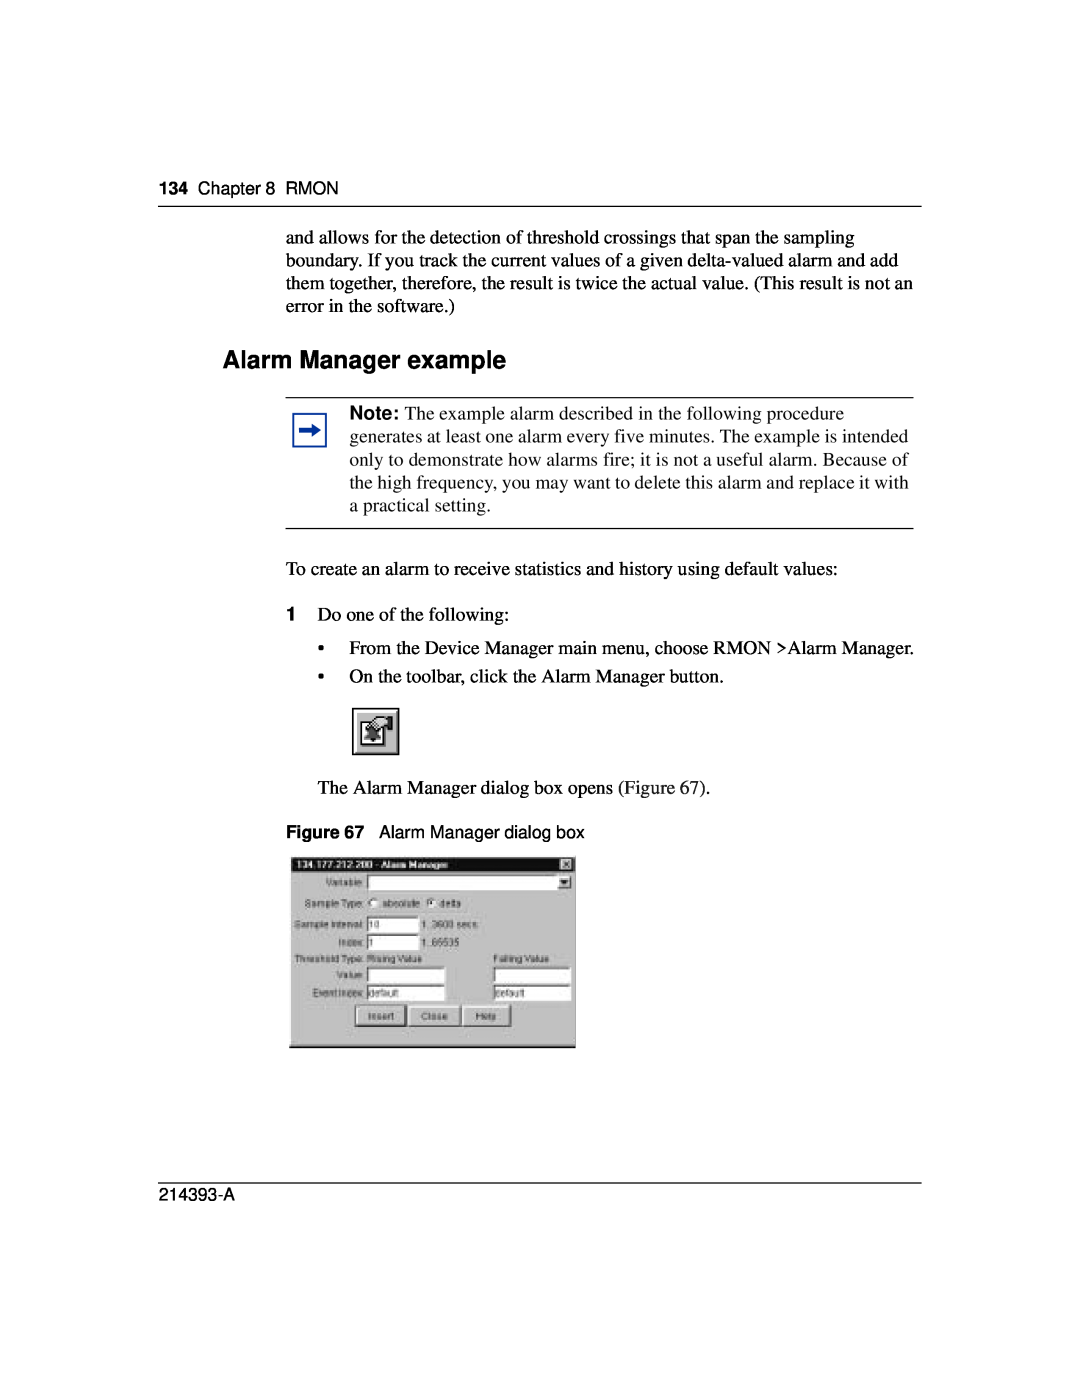 Nortel Networks 214393-A manual Alarm Manager example 